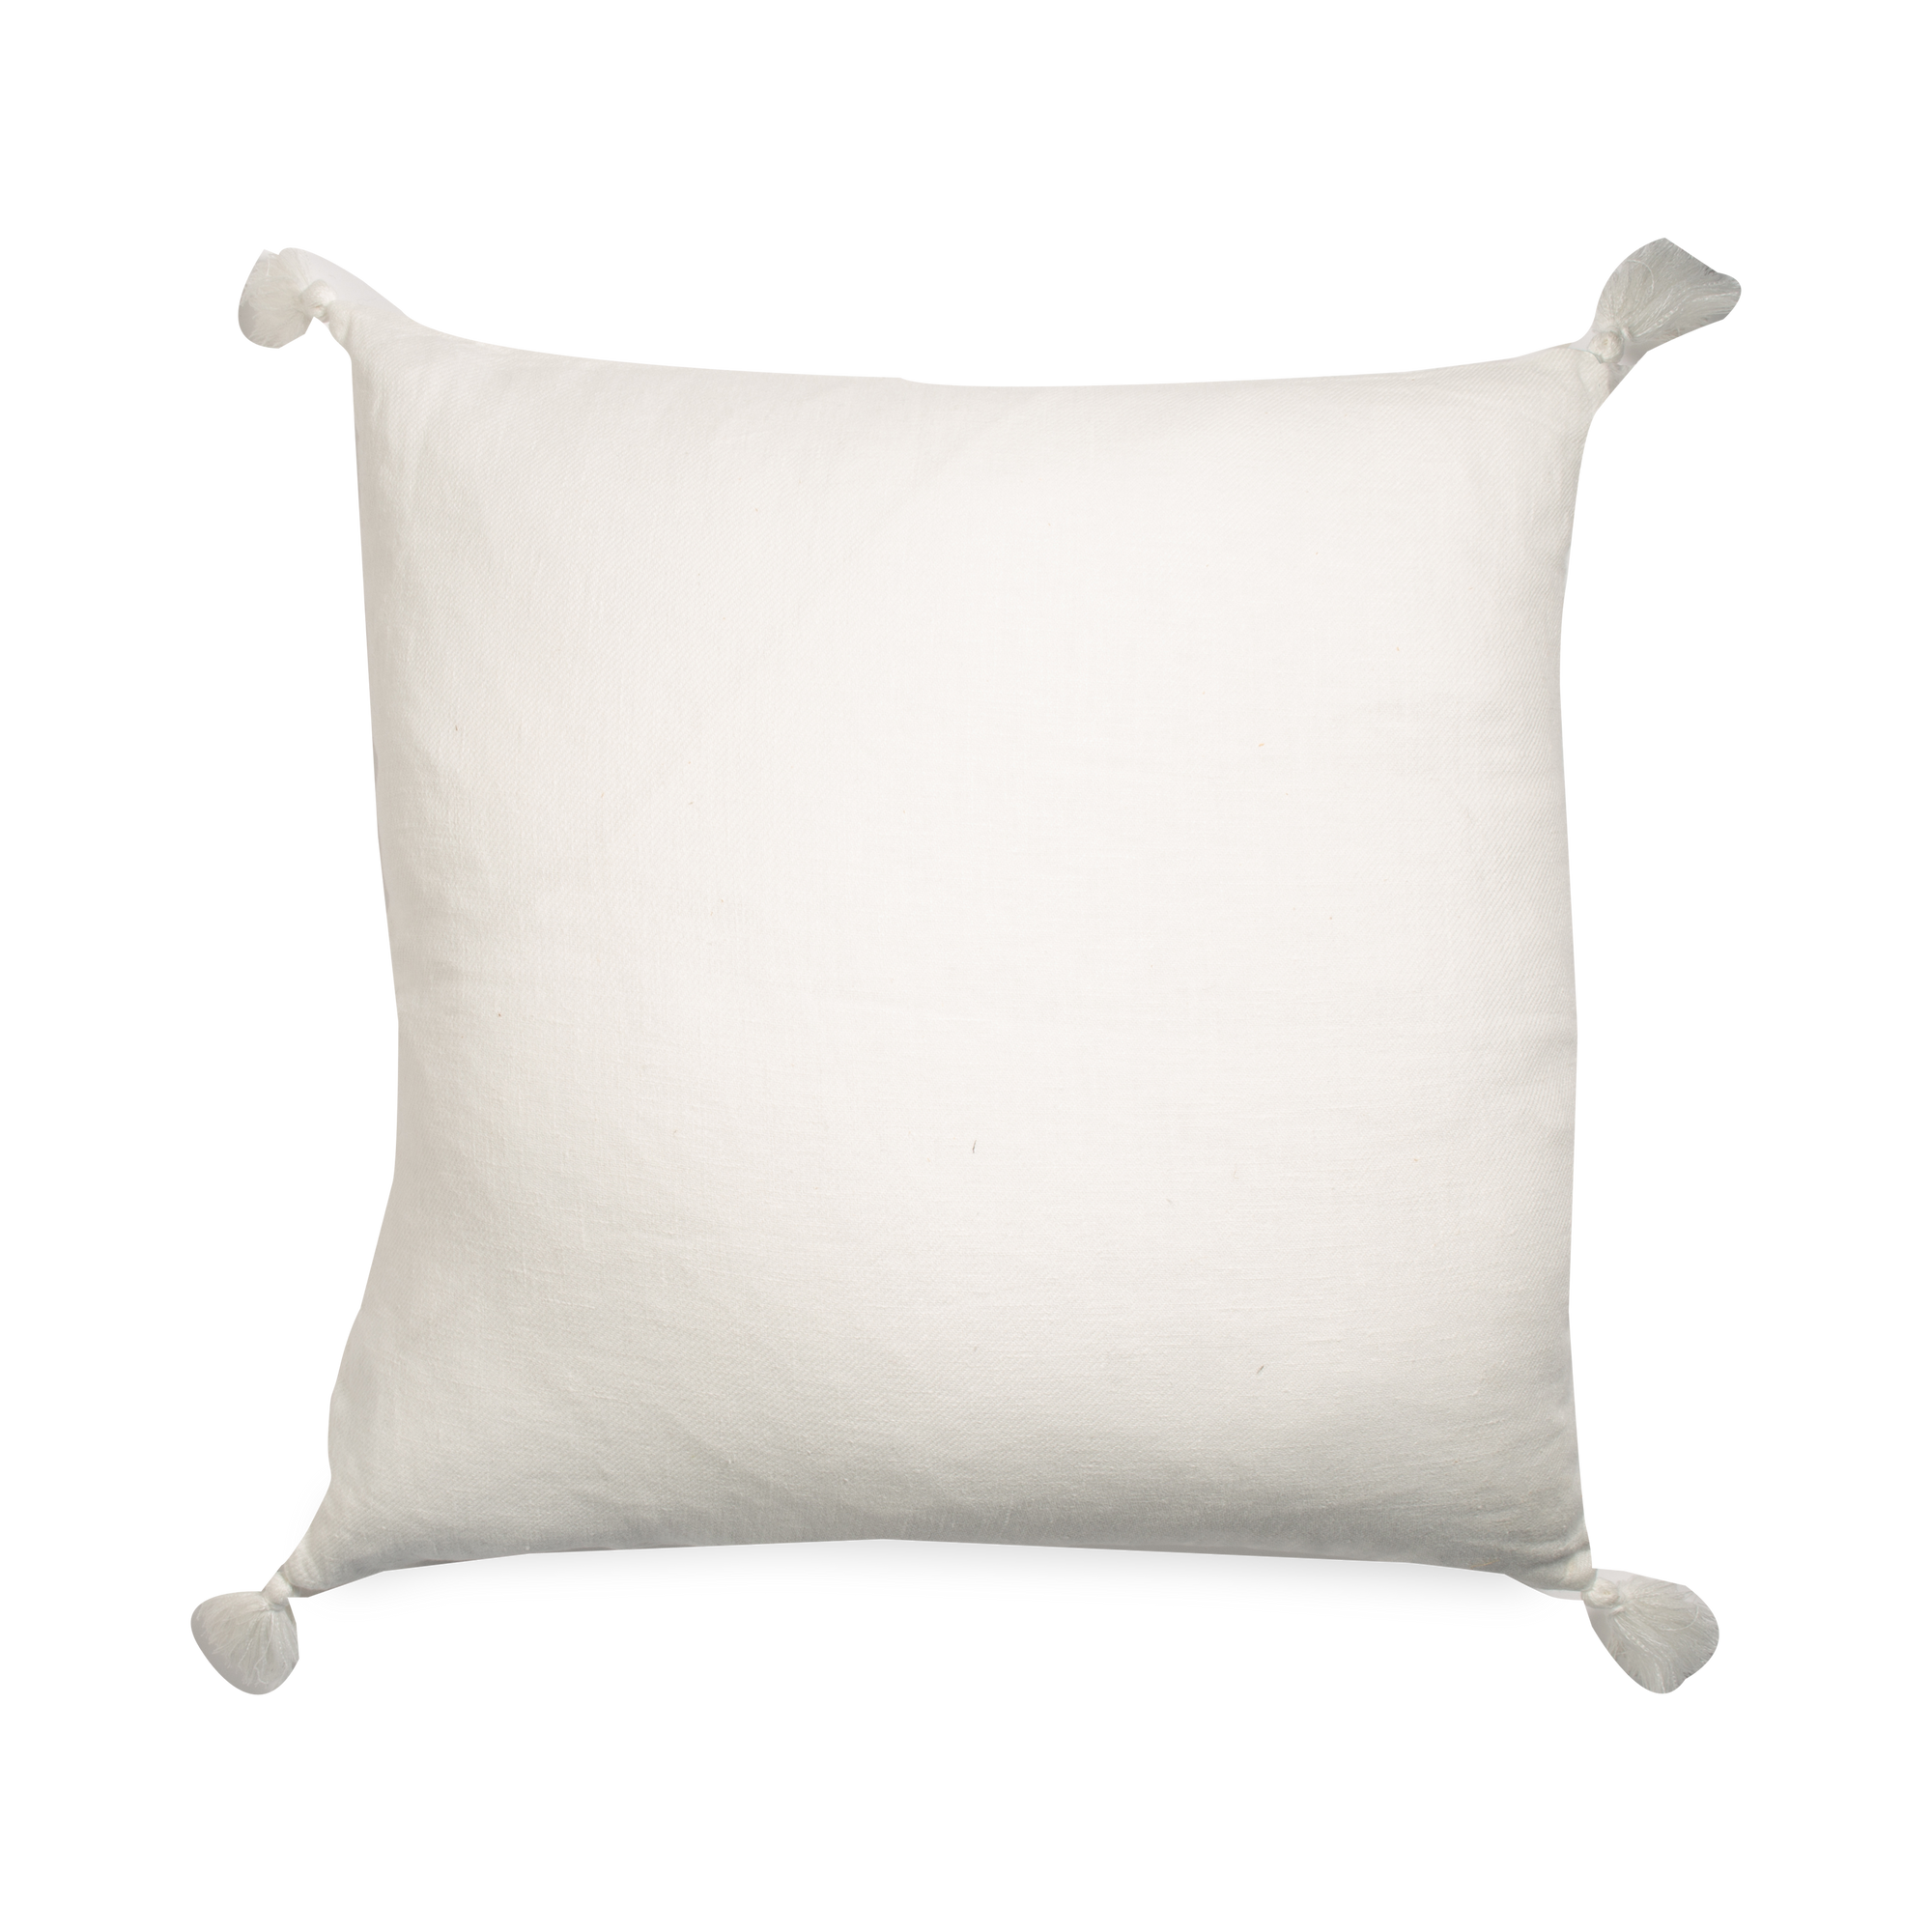 This pillow features a stone-washed linen cover in white with a tassel in each corner.